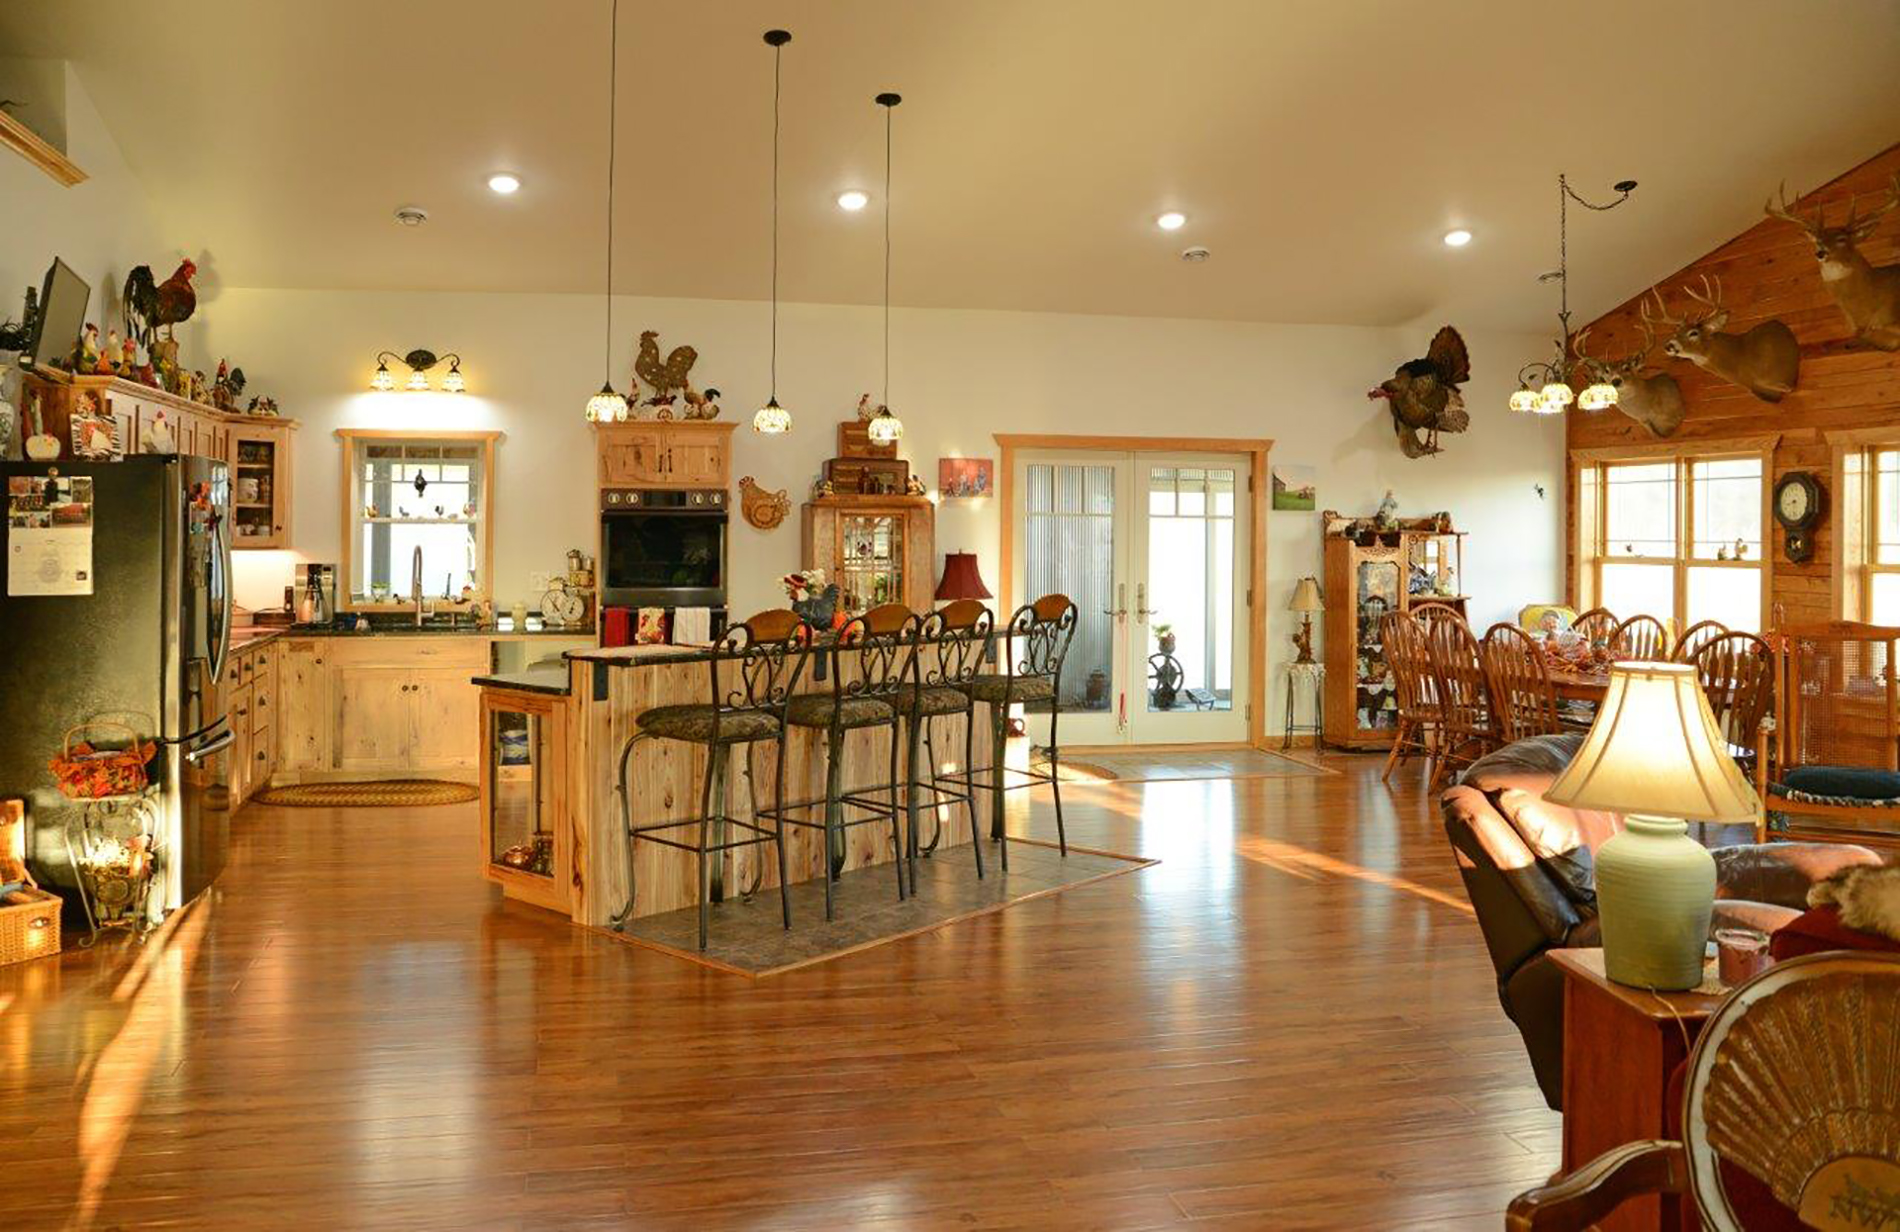 Interior of a post frame pole barn home kitchen and living room areas